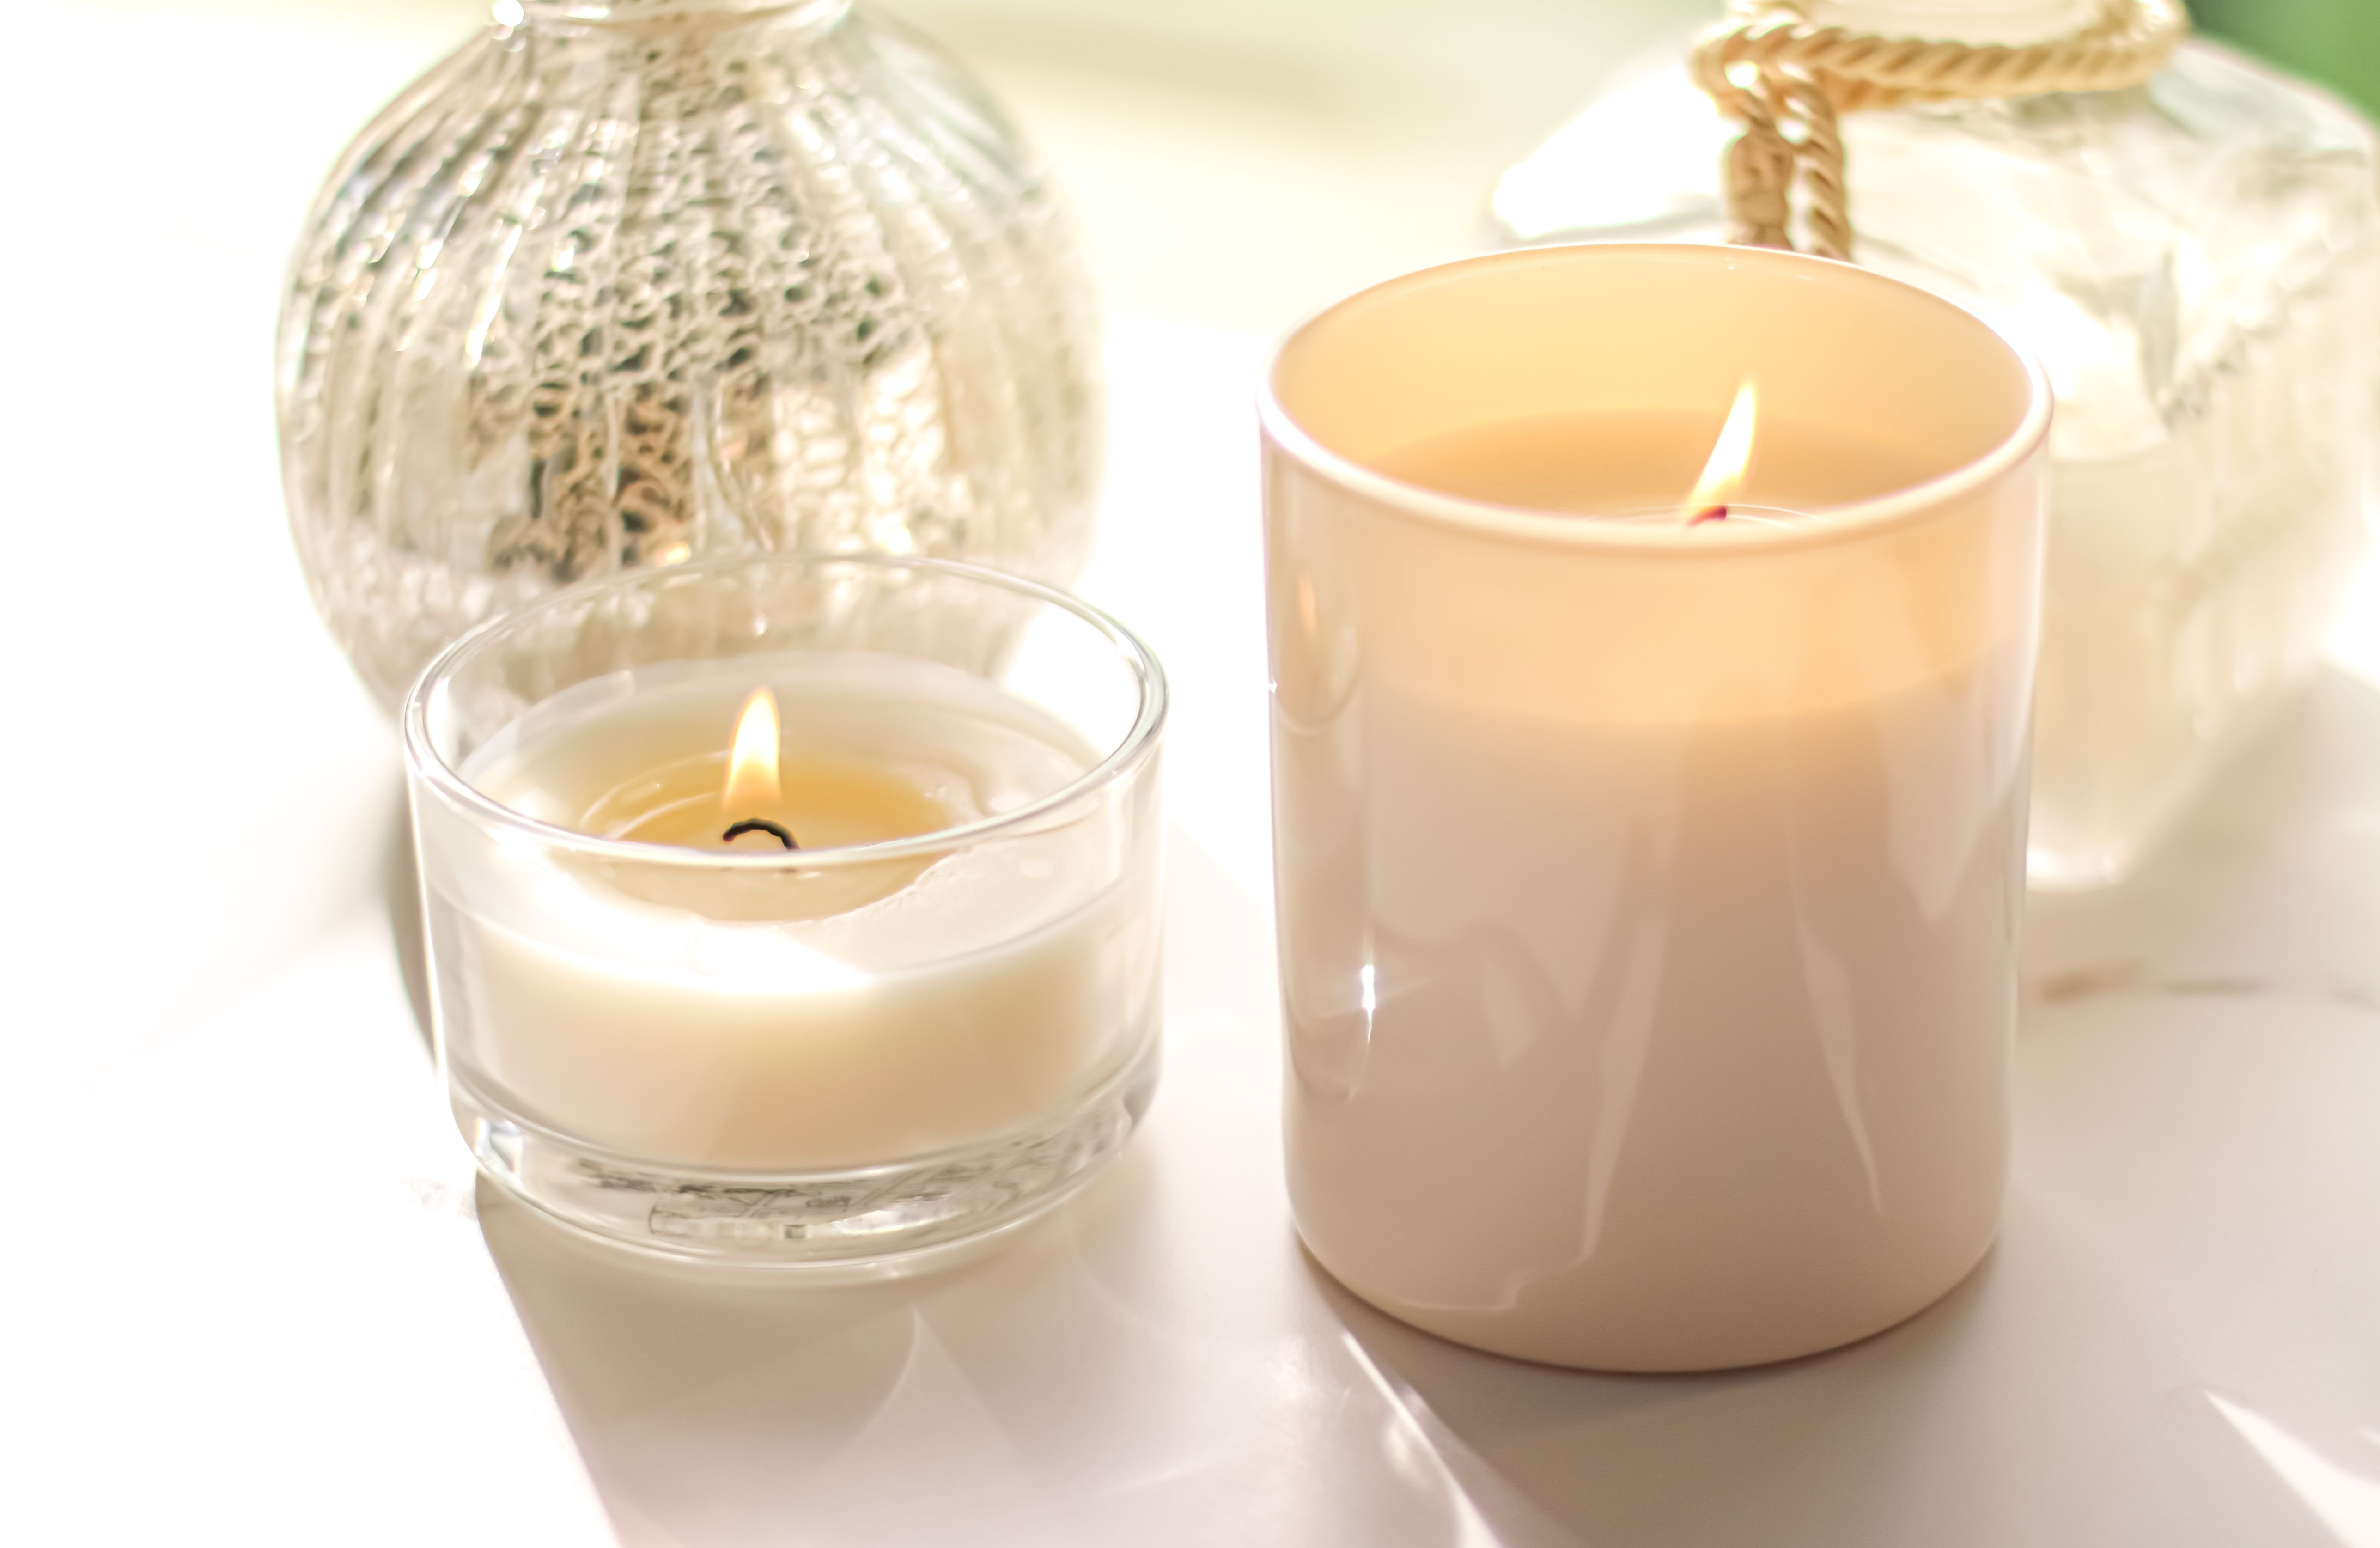 Are Candles Bad For You? Risks And Safety Tips Per Experts